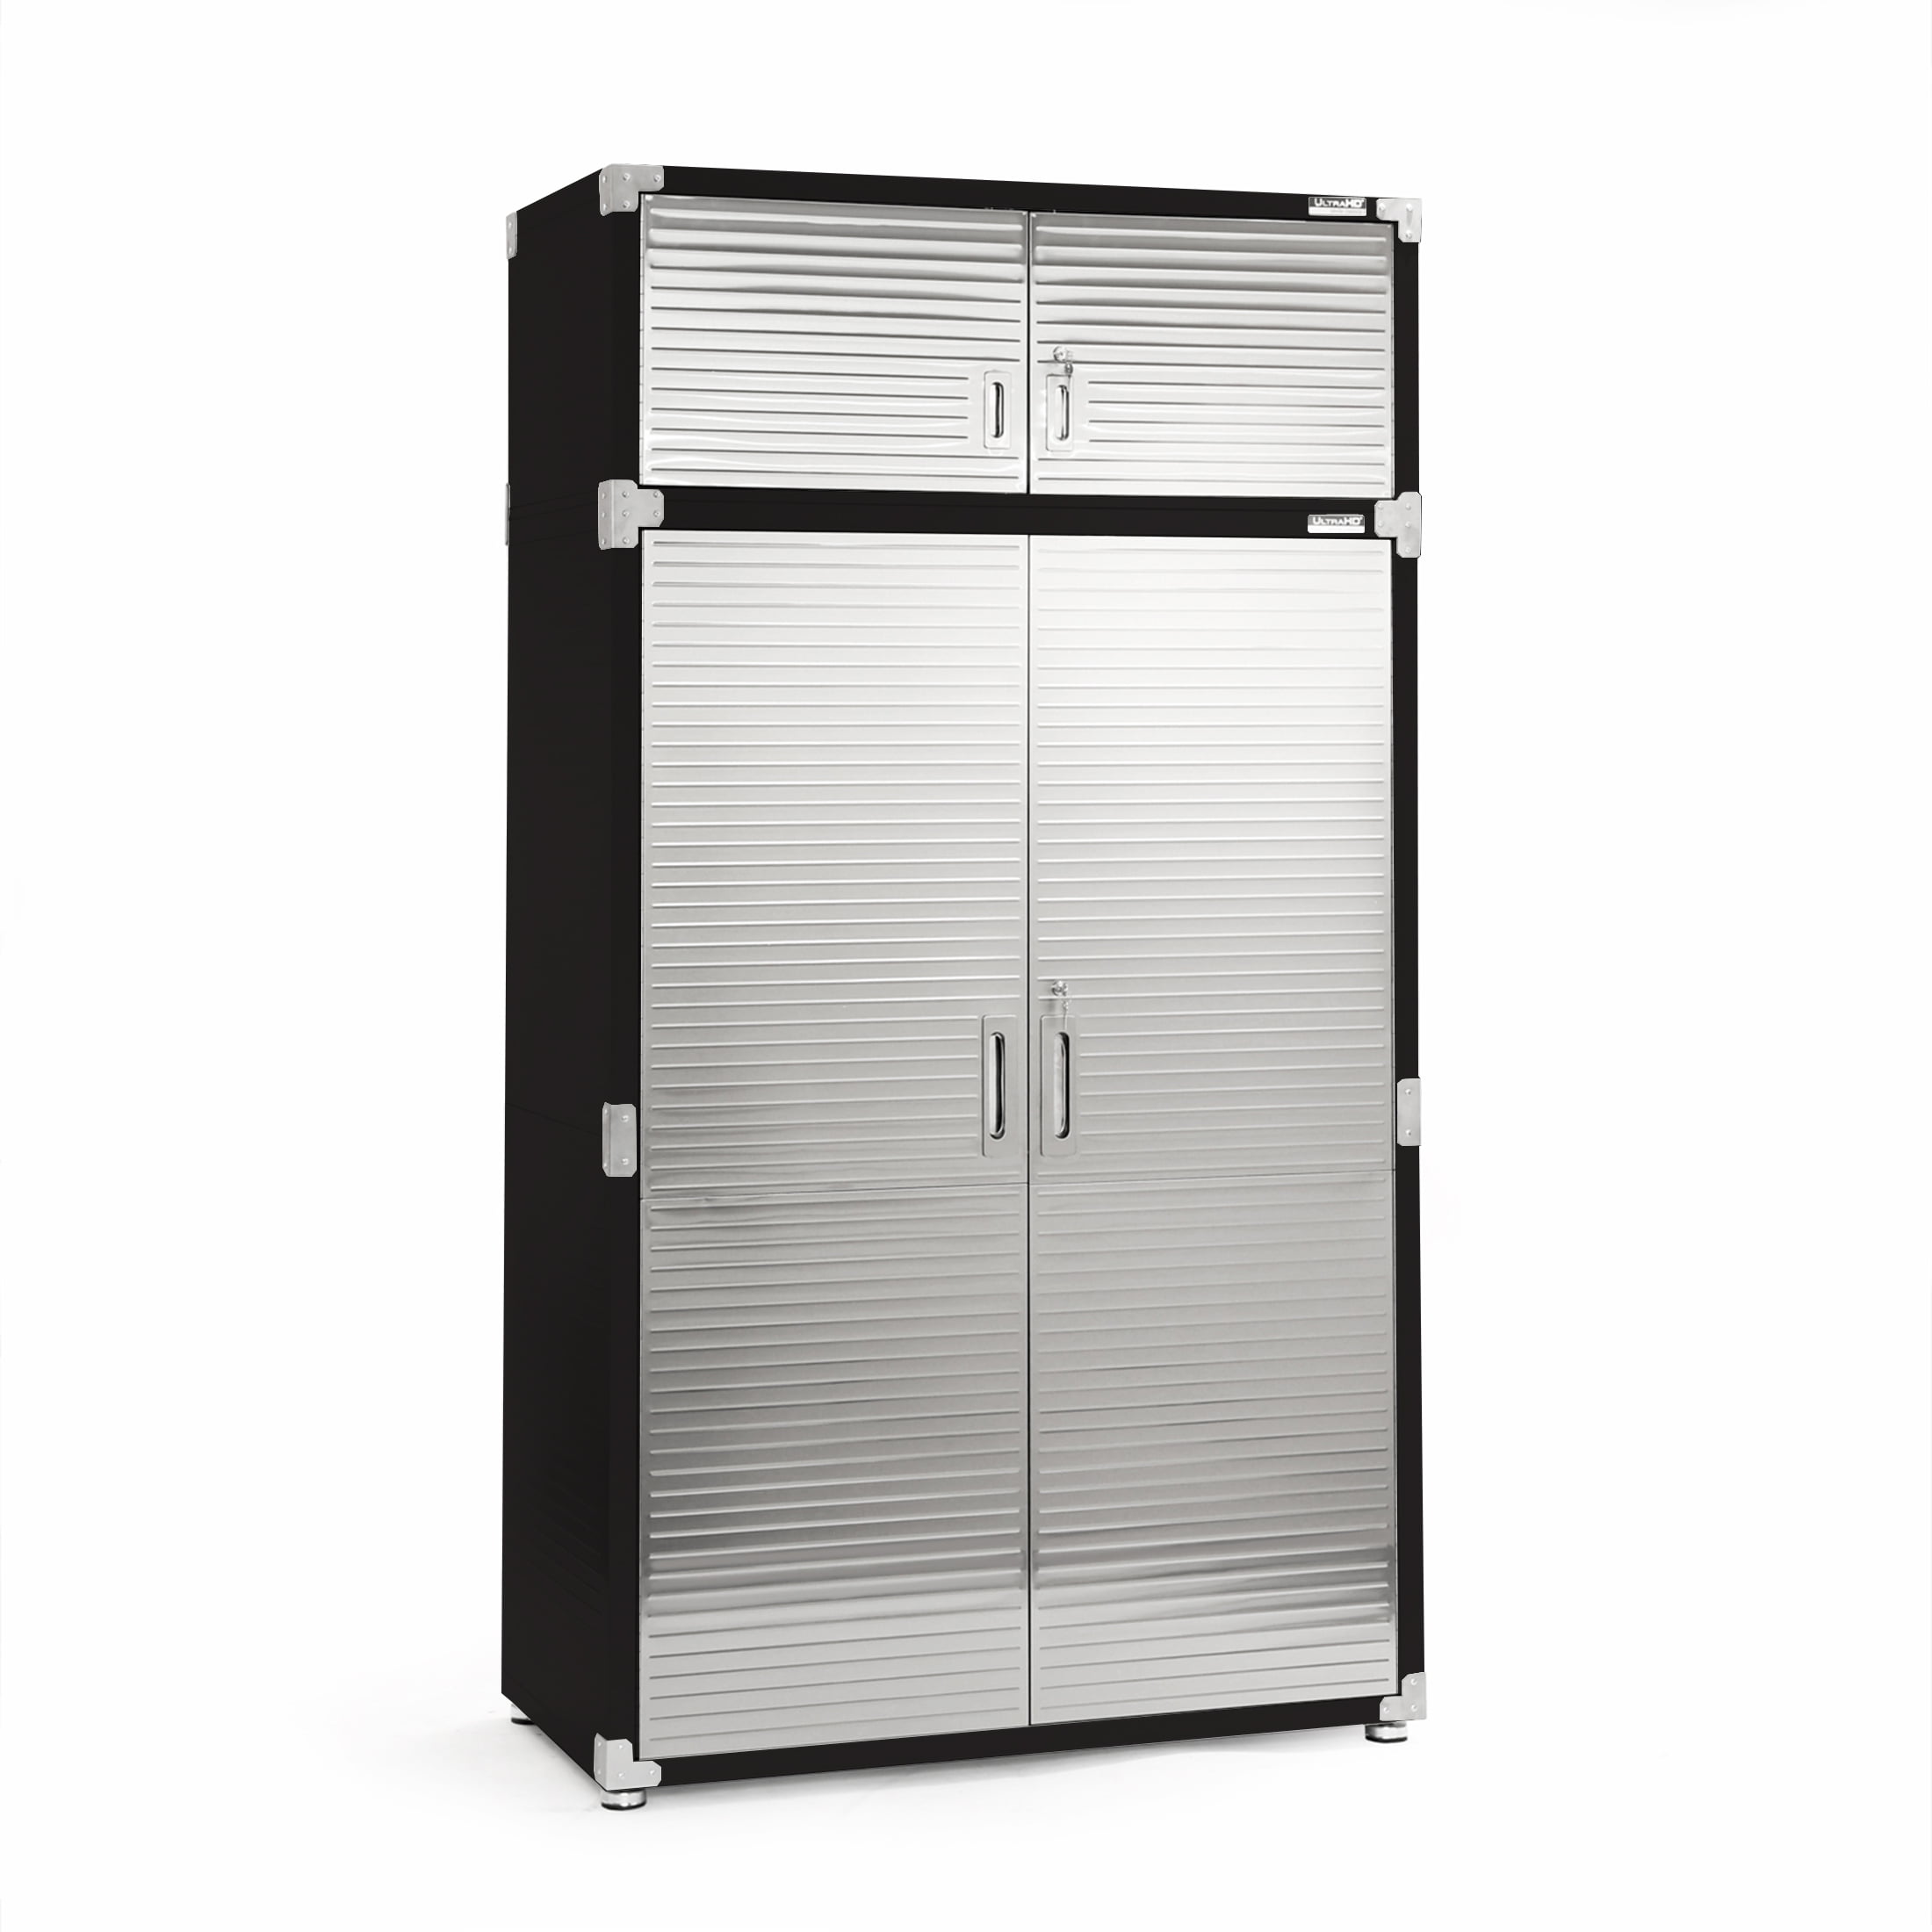 45-LD-243-CL-CA-SS – Extreme Duty 12 GA Stainless Steel Mobile Medical  Cabinet with Cylinder Lock, 3 Shelves - 48 In. W x 24 In. D x 68 In. H -  Strong Hold